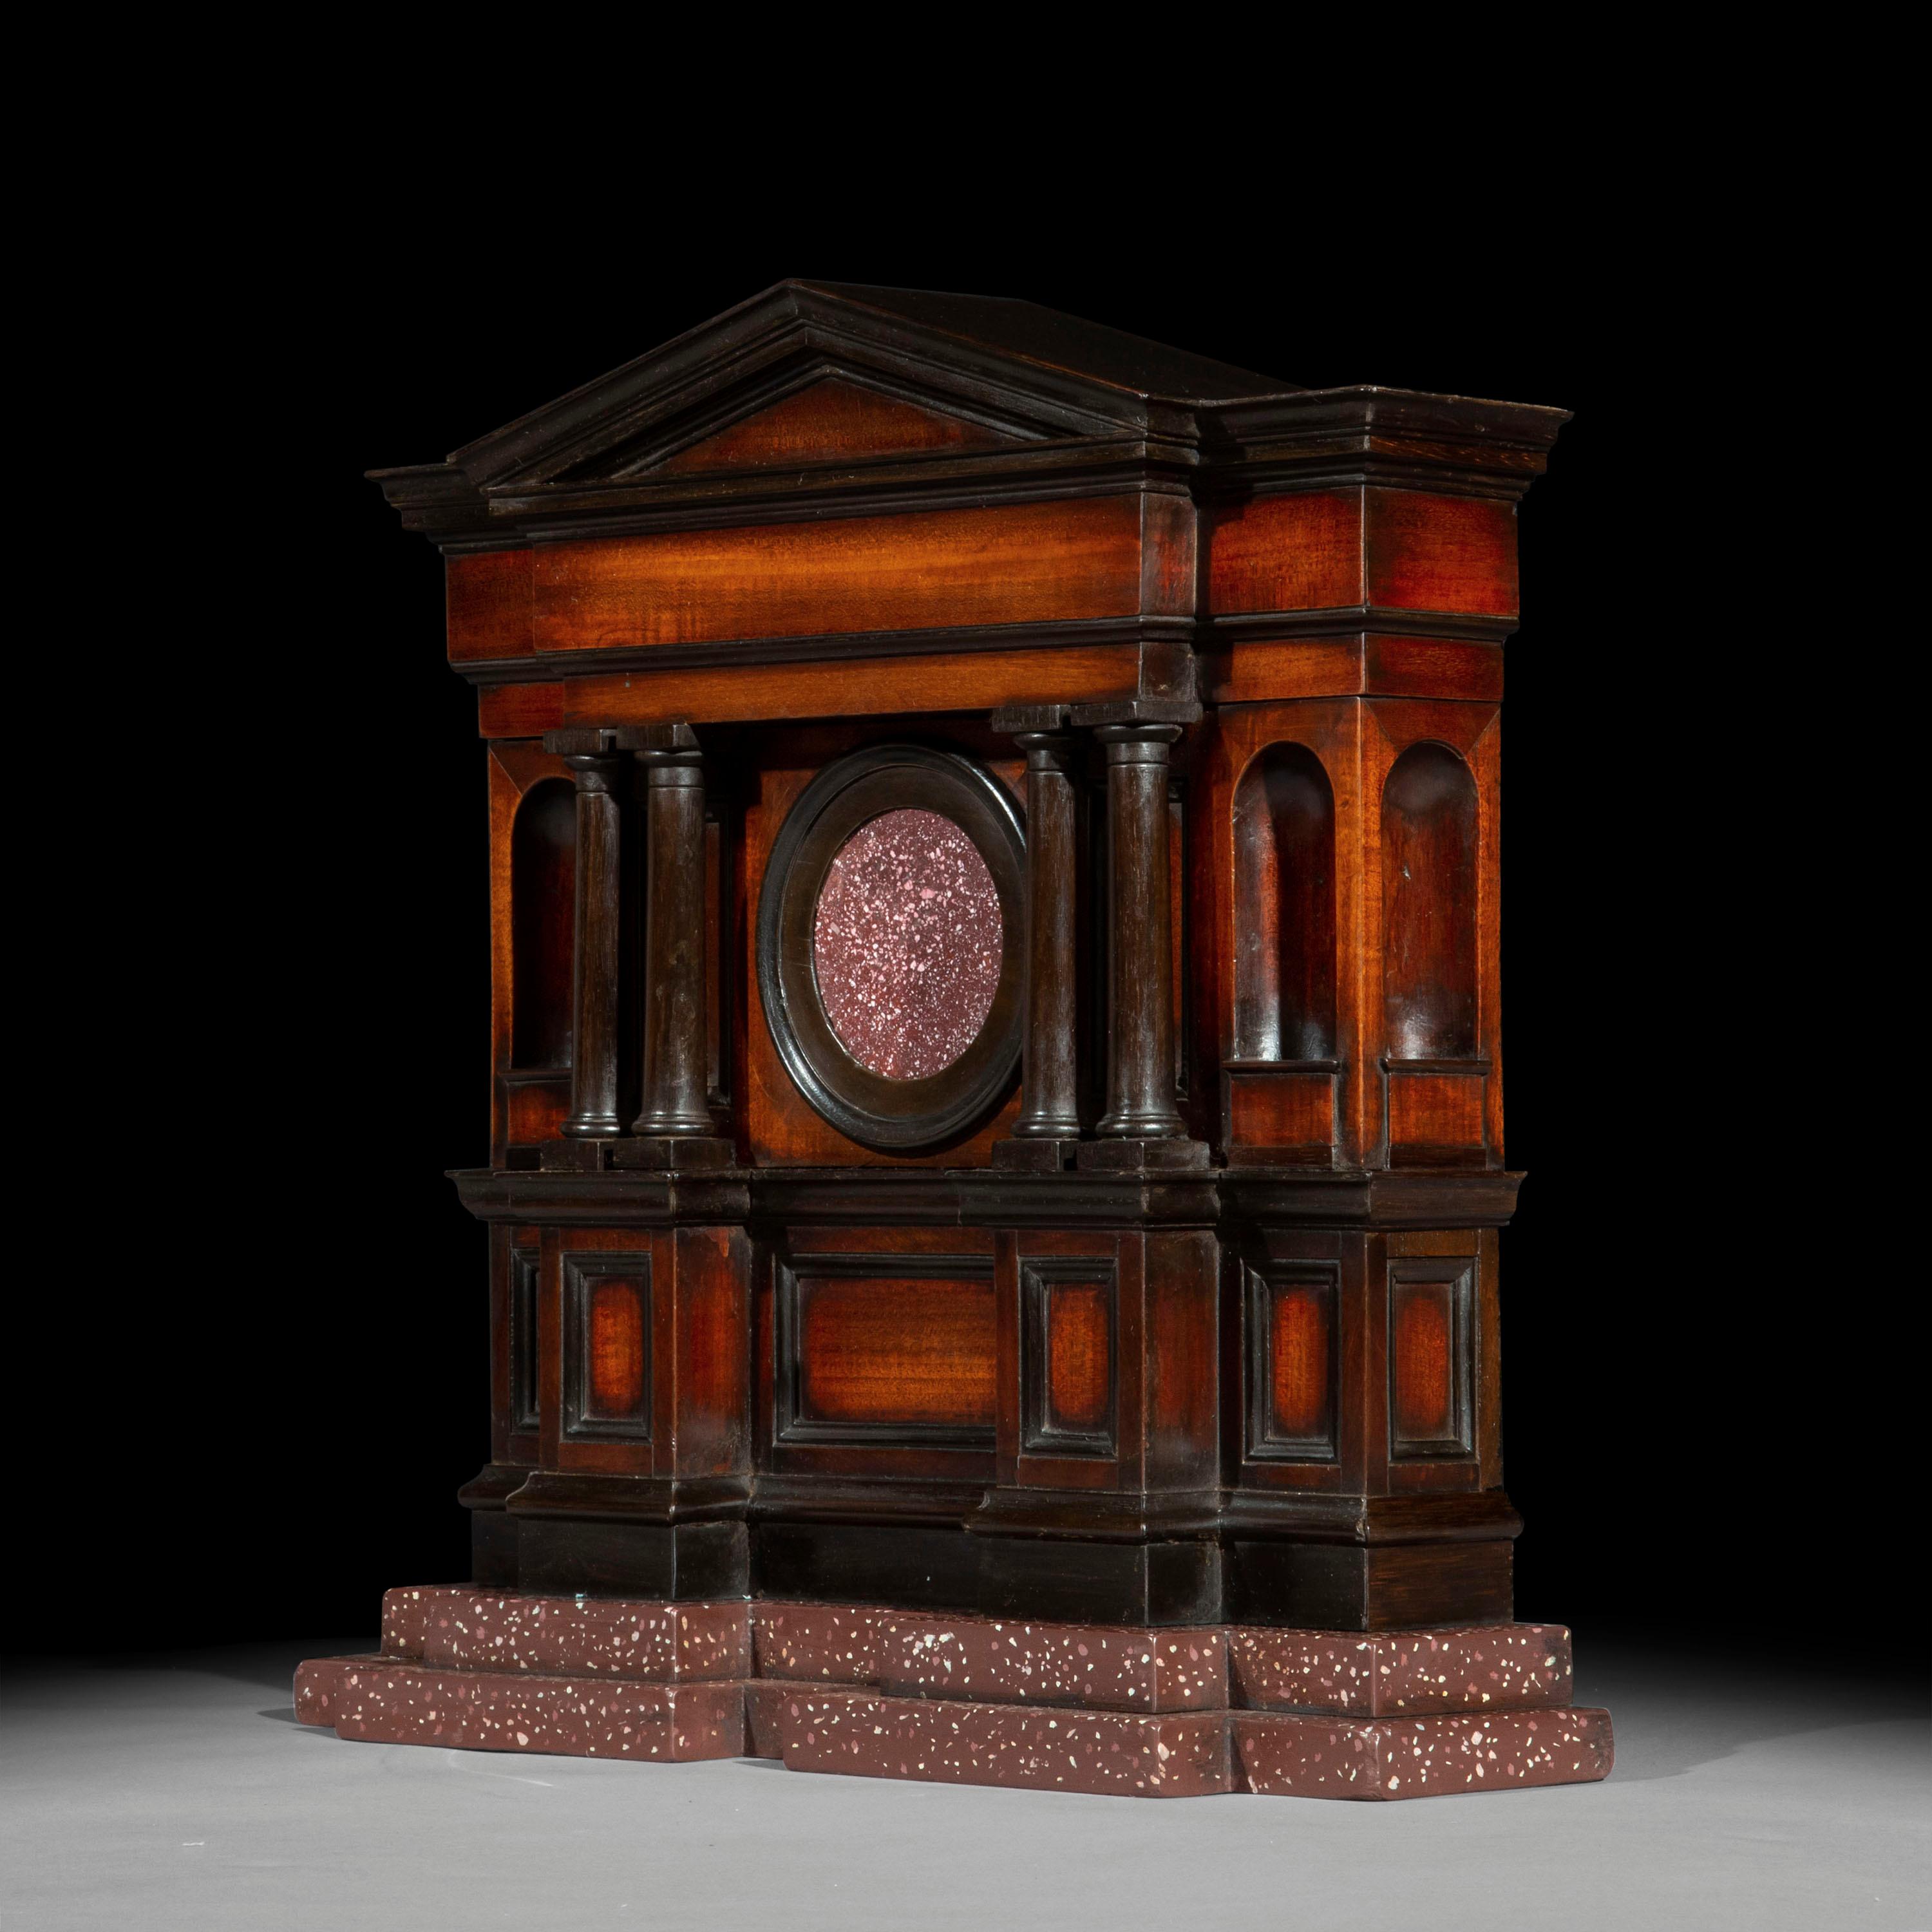 English Antique 18th Century Architectural Model in Palladian Style, circa 1750